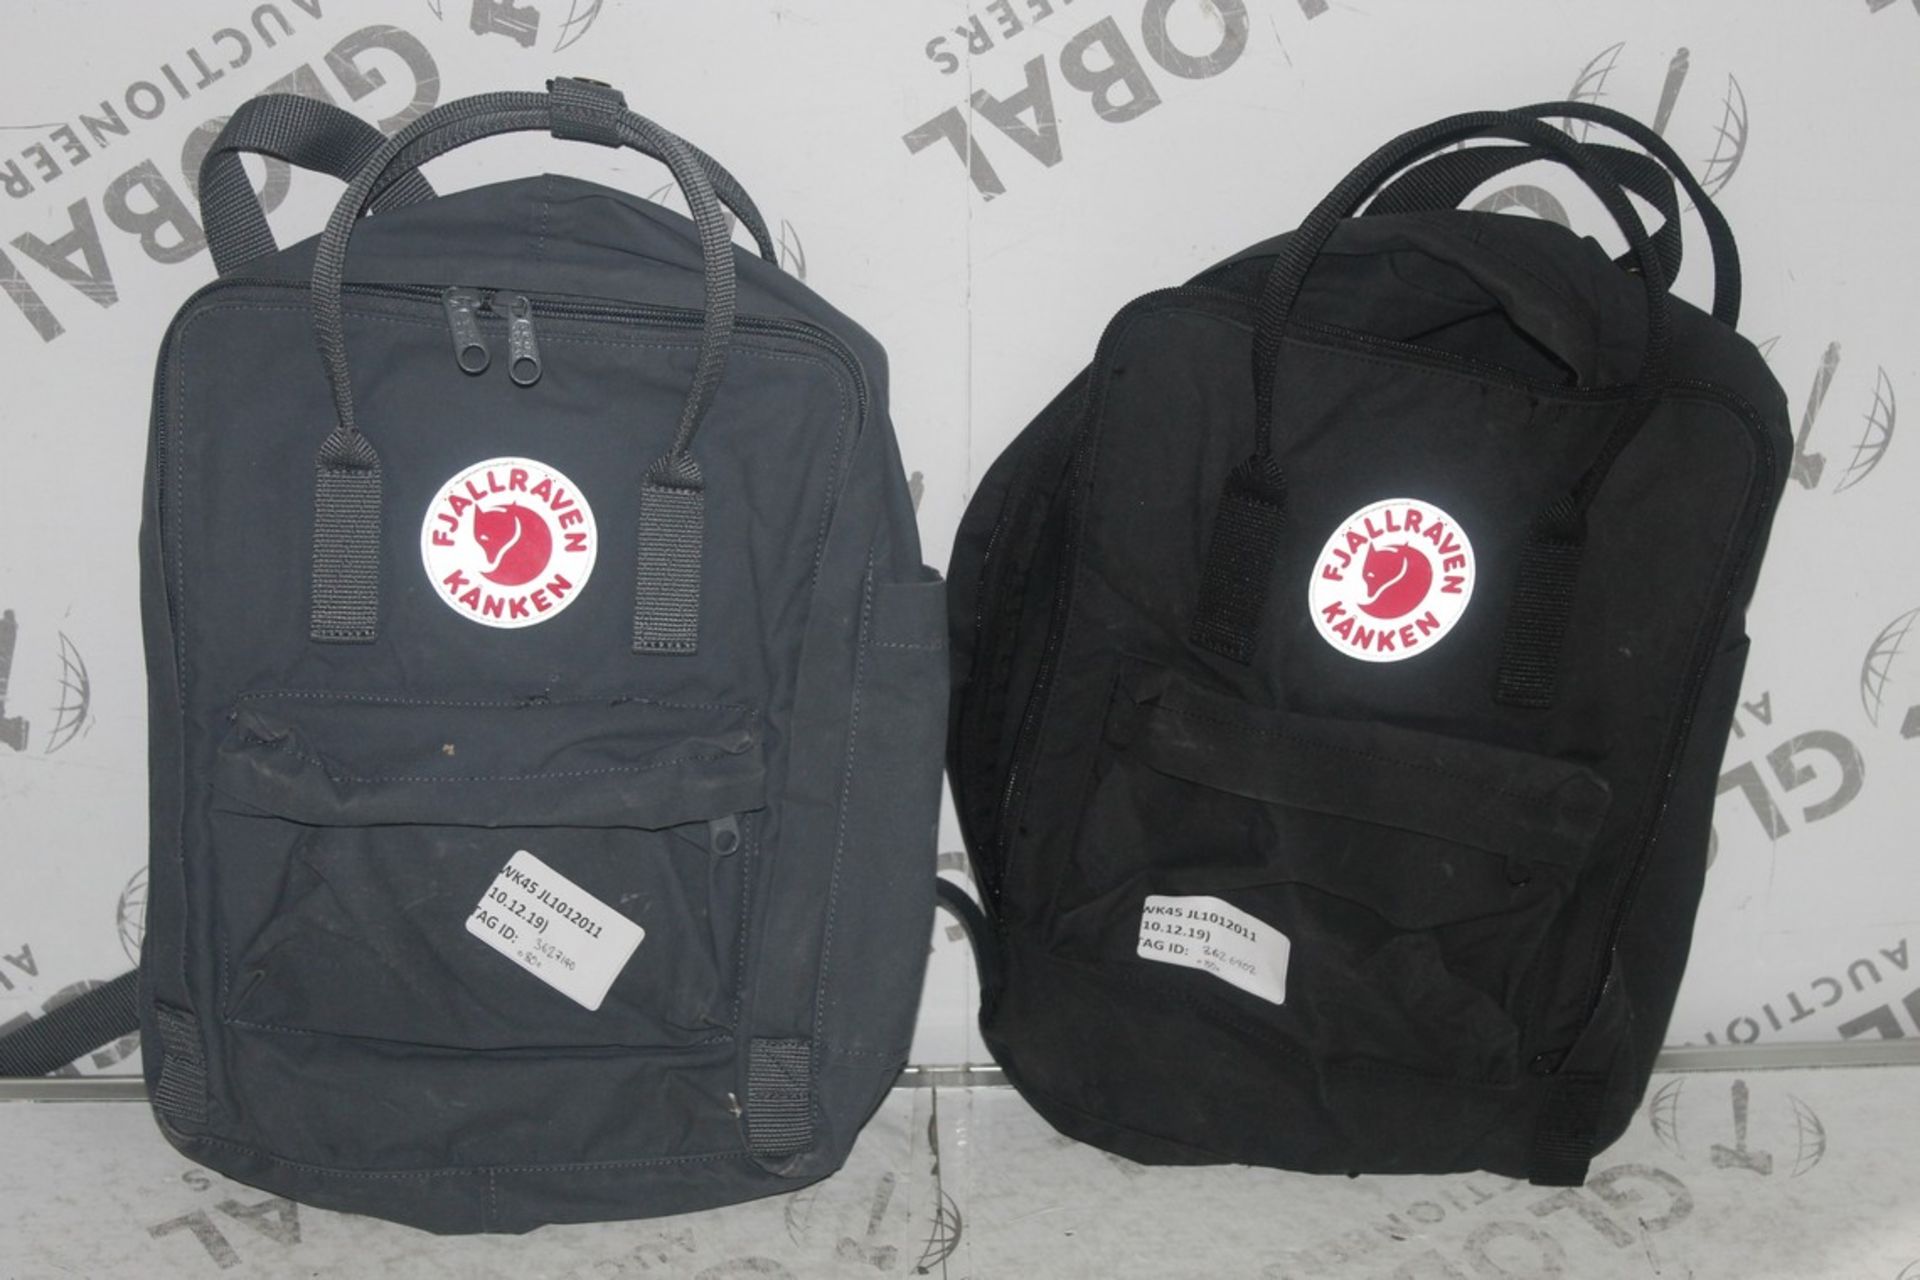 Falraven Rucksacks in Grey and Black RRP £80 (3627140)(3626902) (Public Viewing and Appraisals